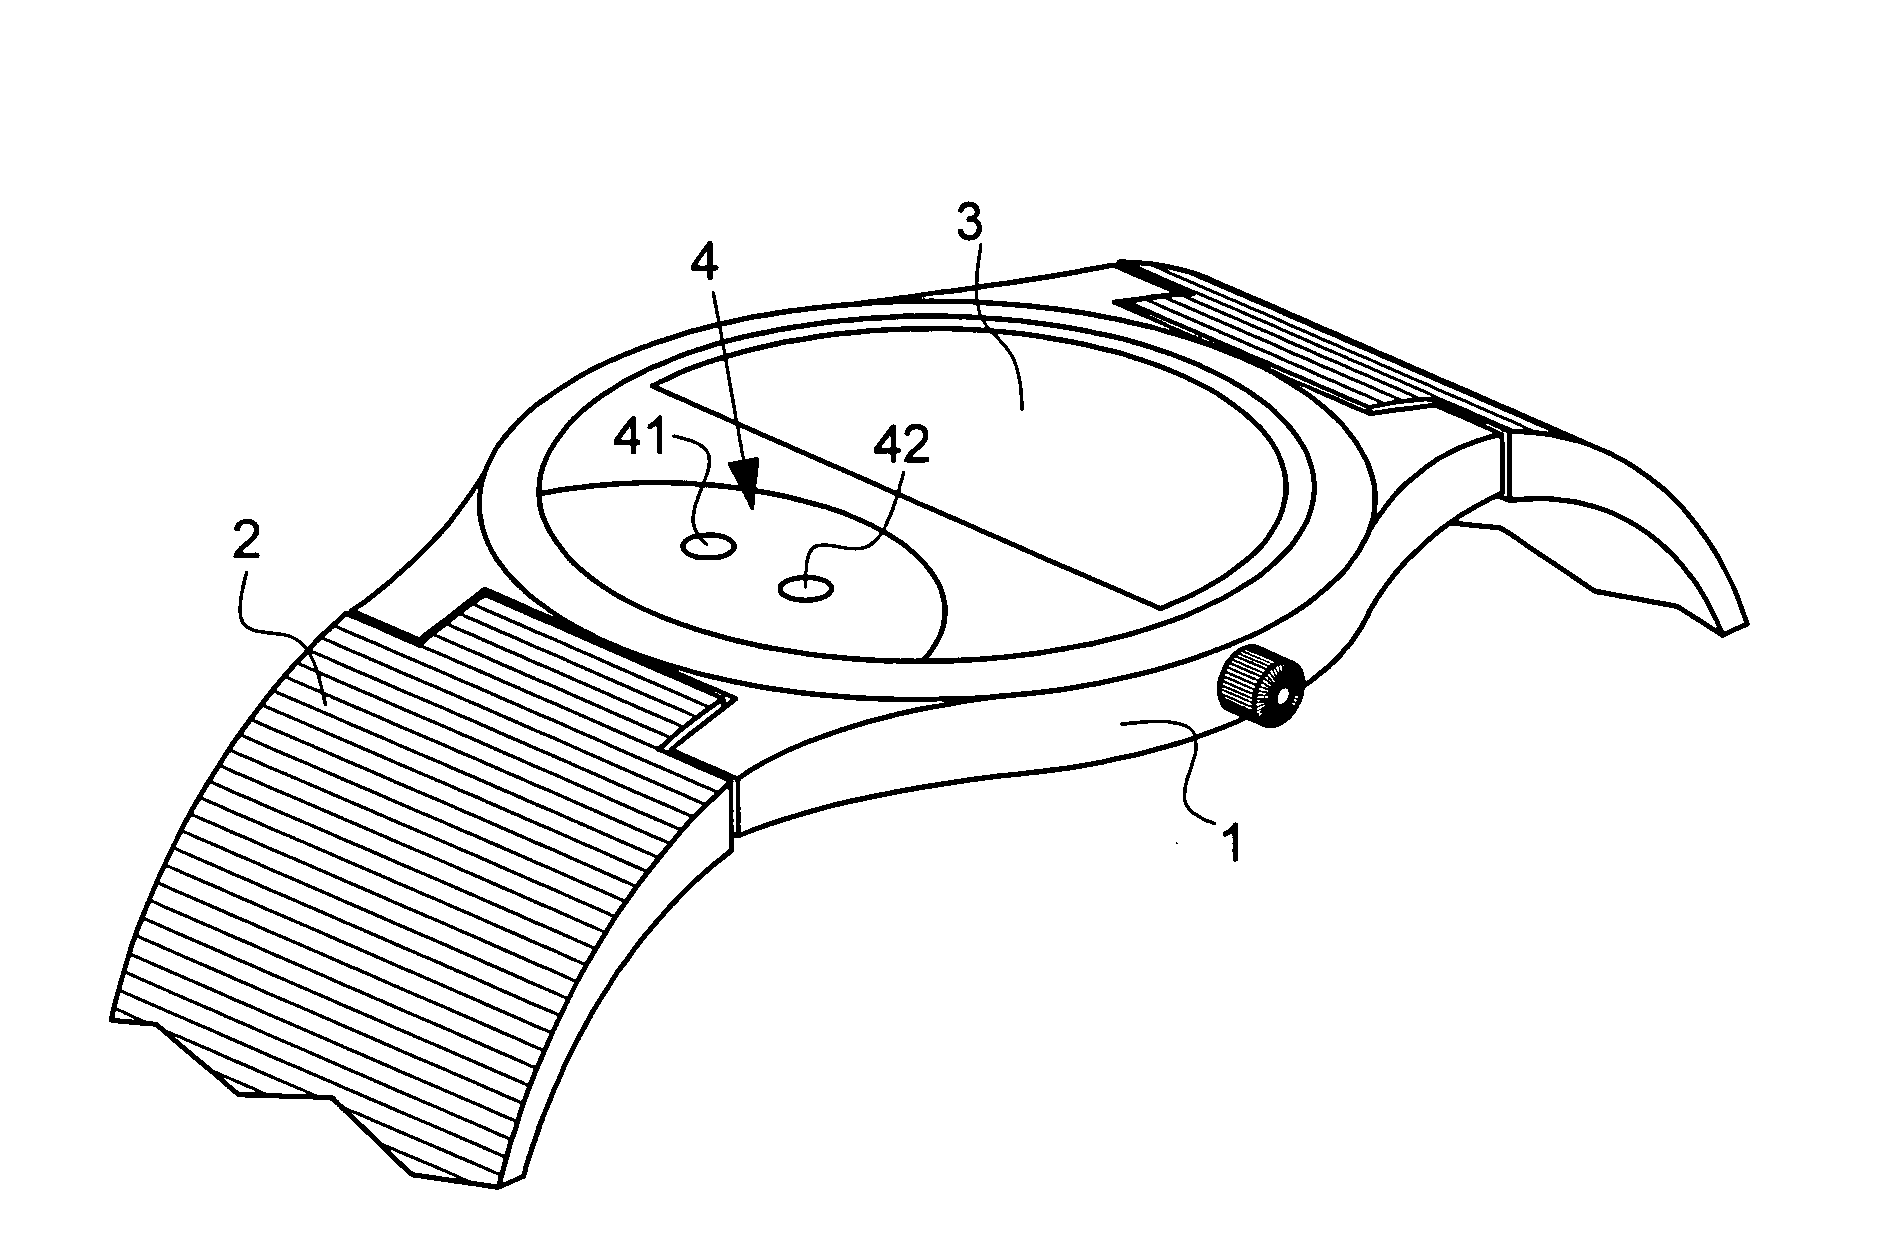 Instrument having optical device measuring a physiological quantity and means for transmitting and/or receiving data